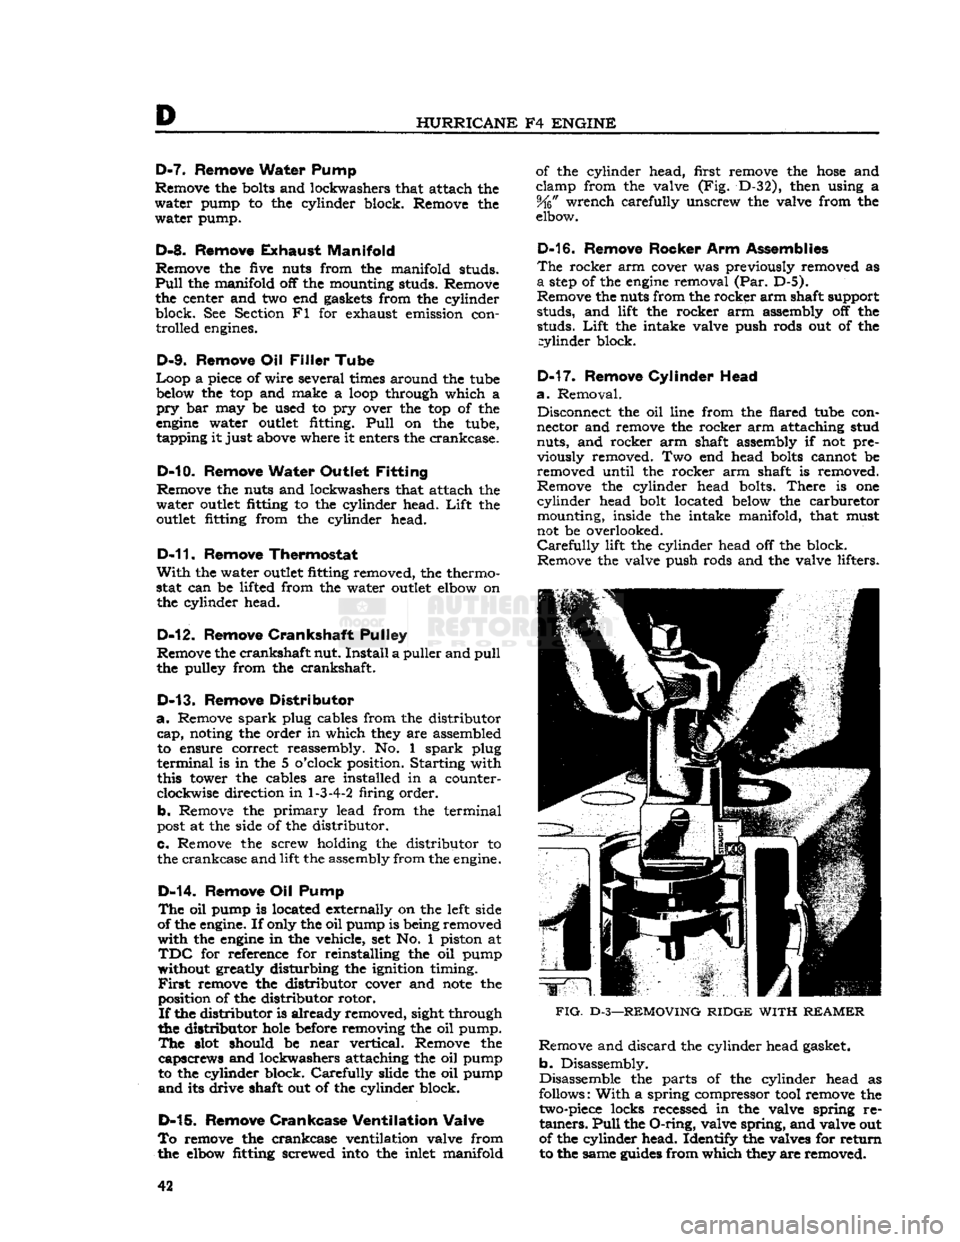 JEEP CJ 1953  Service Manual 
D 

HURRICANE
 F4
 ENGINE 
D-7.
 Remove Water Pump 
Remove the
 bolts
 and lockwashers that attach the 
water pump to the cylinder block. Remove the  water pump. 

D-8.
 Remove
 Exhaust
 Manifold 
Re